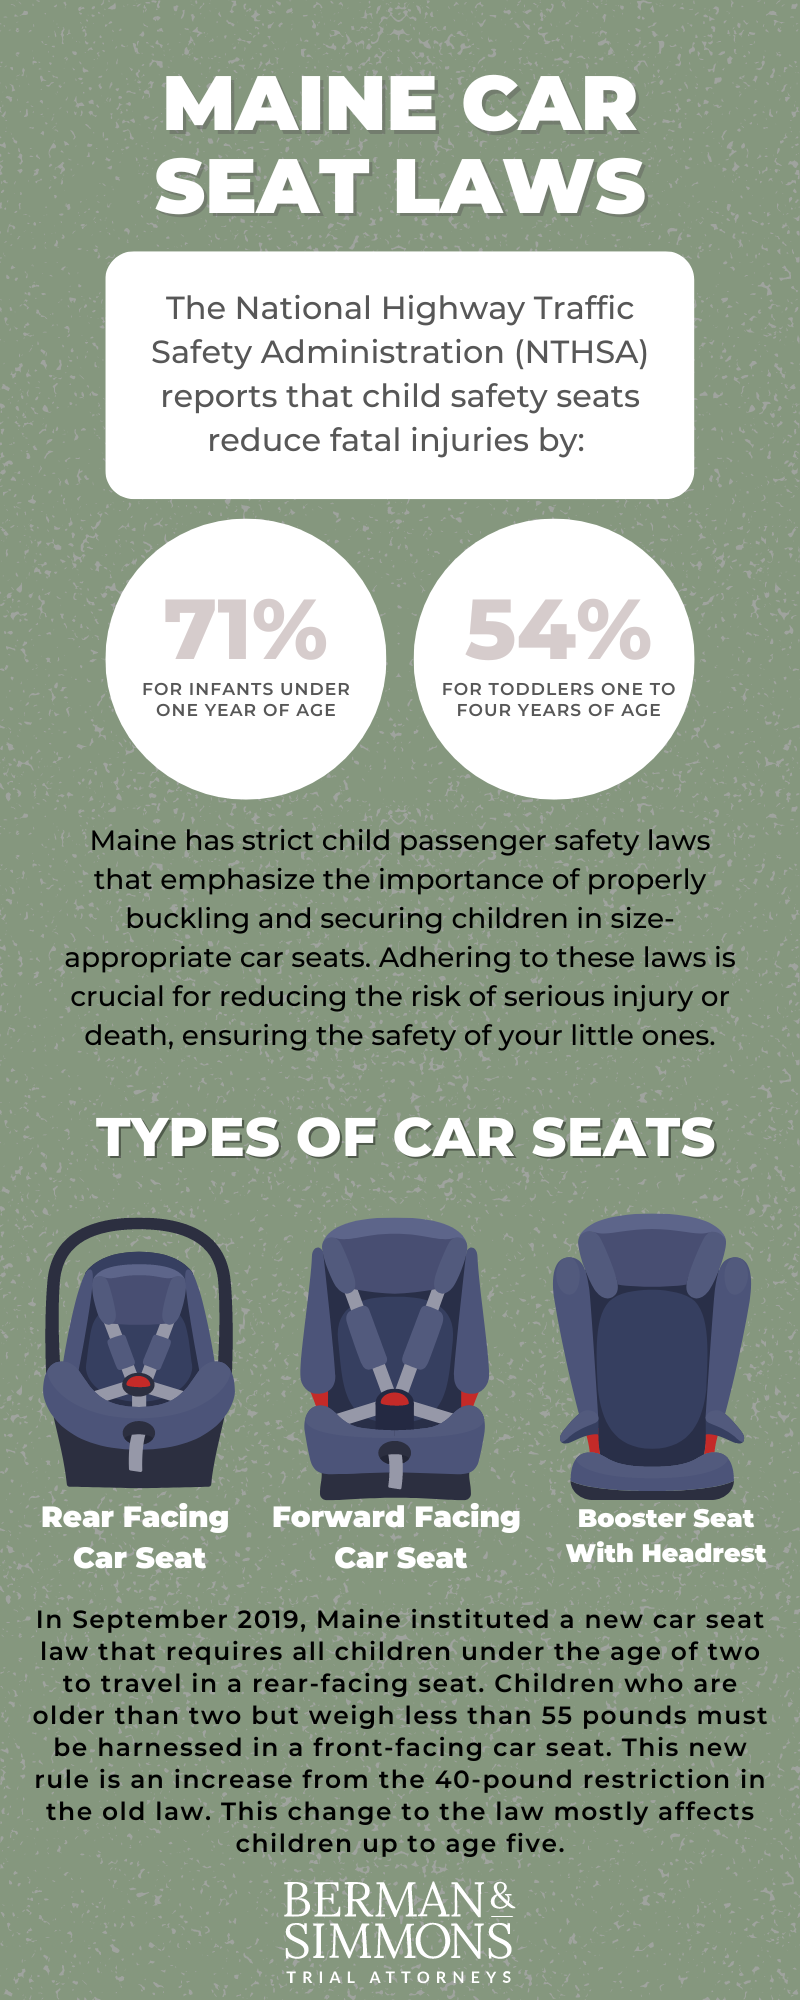 https://www.bermansimmons.com/wp-content/uploads/2020/11/Berman-Simmons-Trial-Attorney-Maine-Car-Seat-Laws-Infographic-2.png